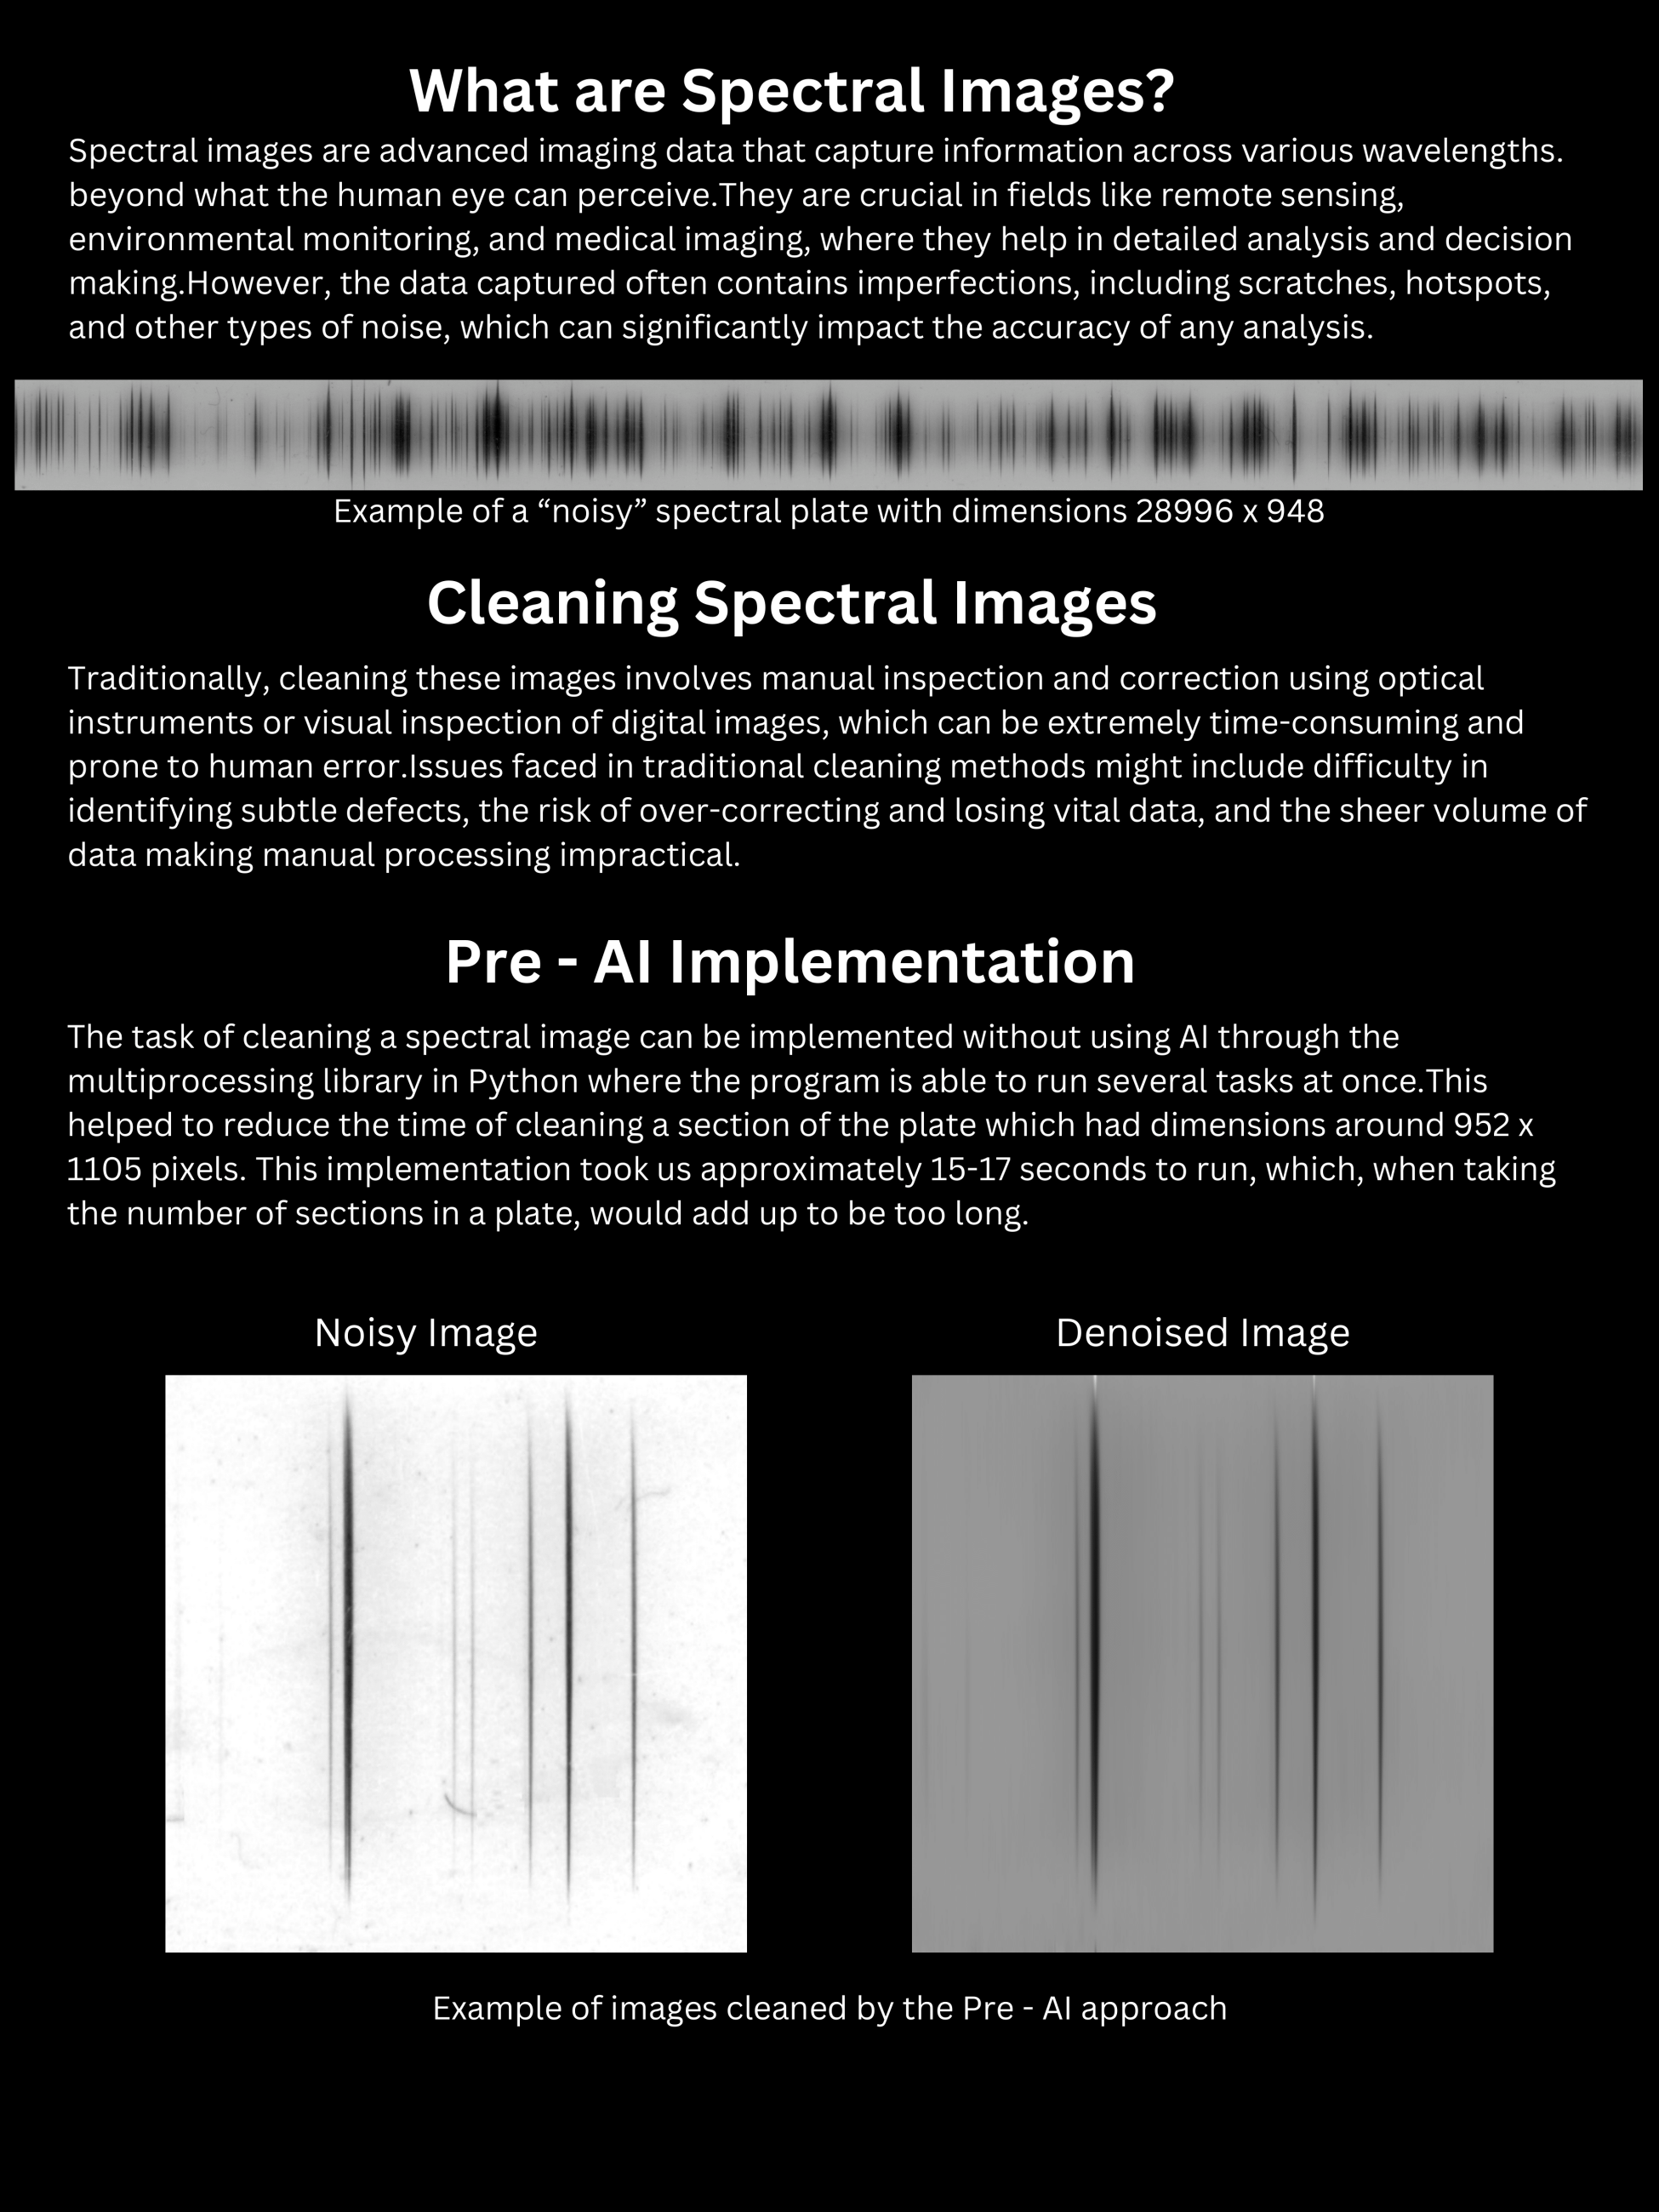 Fall 2023 - Spectral Images an AI Data Driven Approach